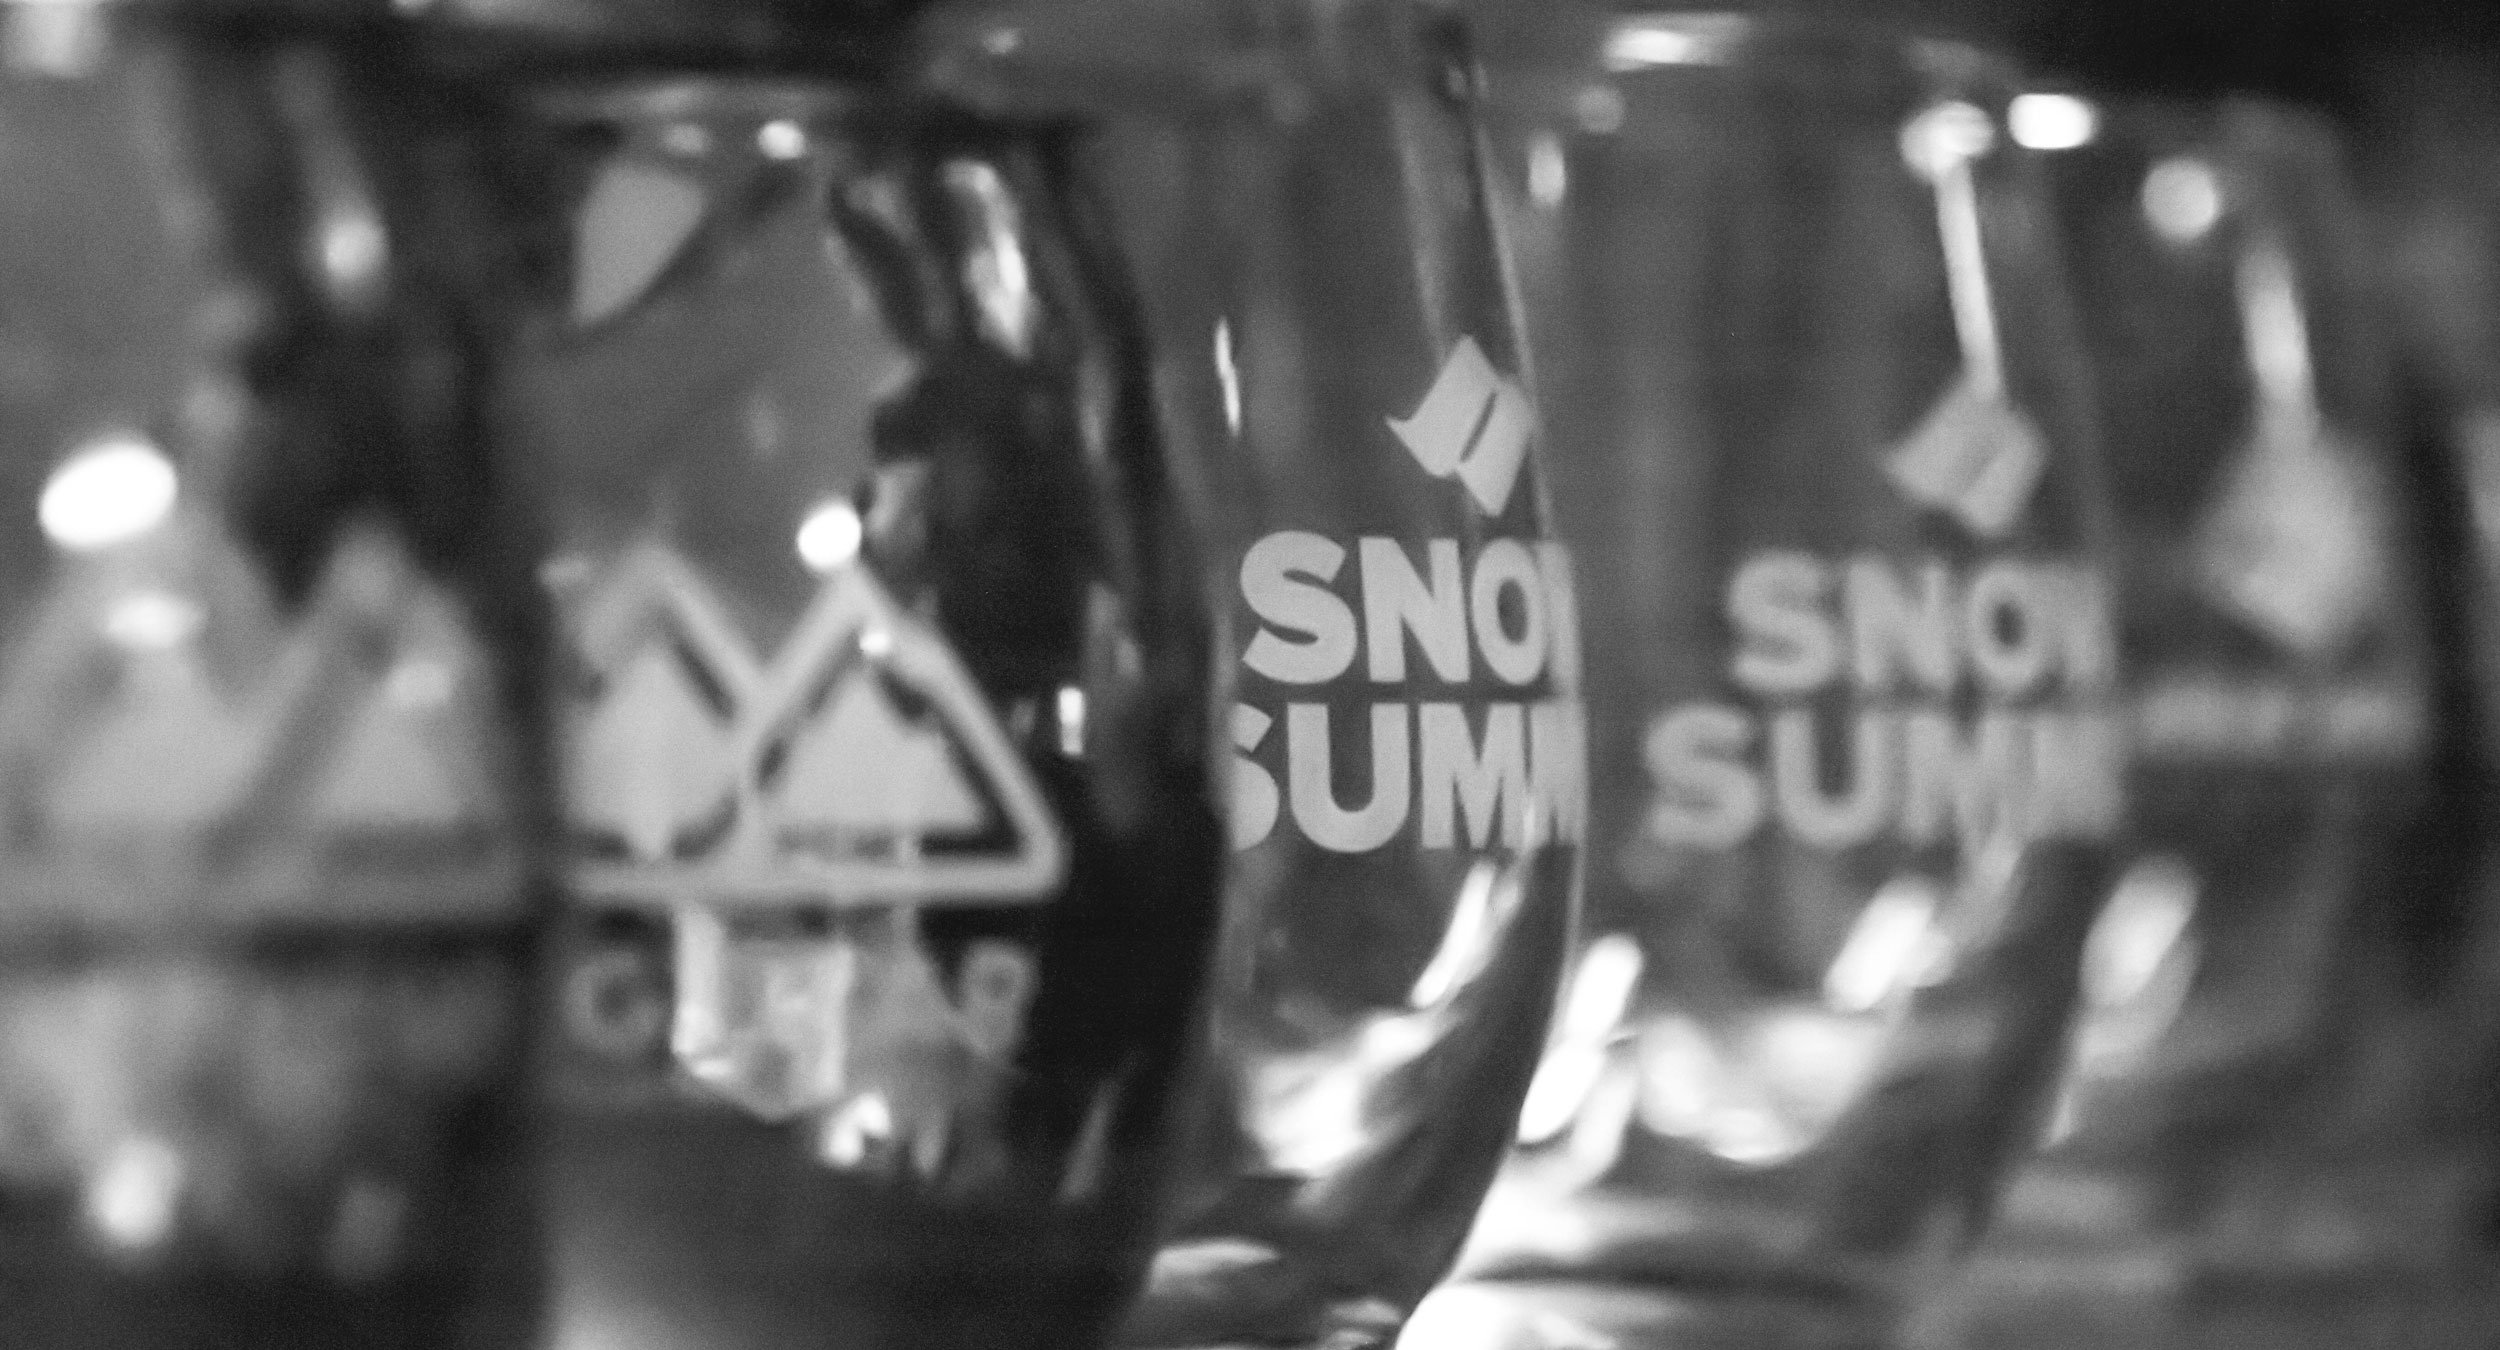 Black and white photo of glass cups with the Snow Summit logo on it